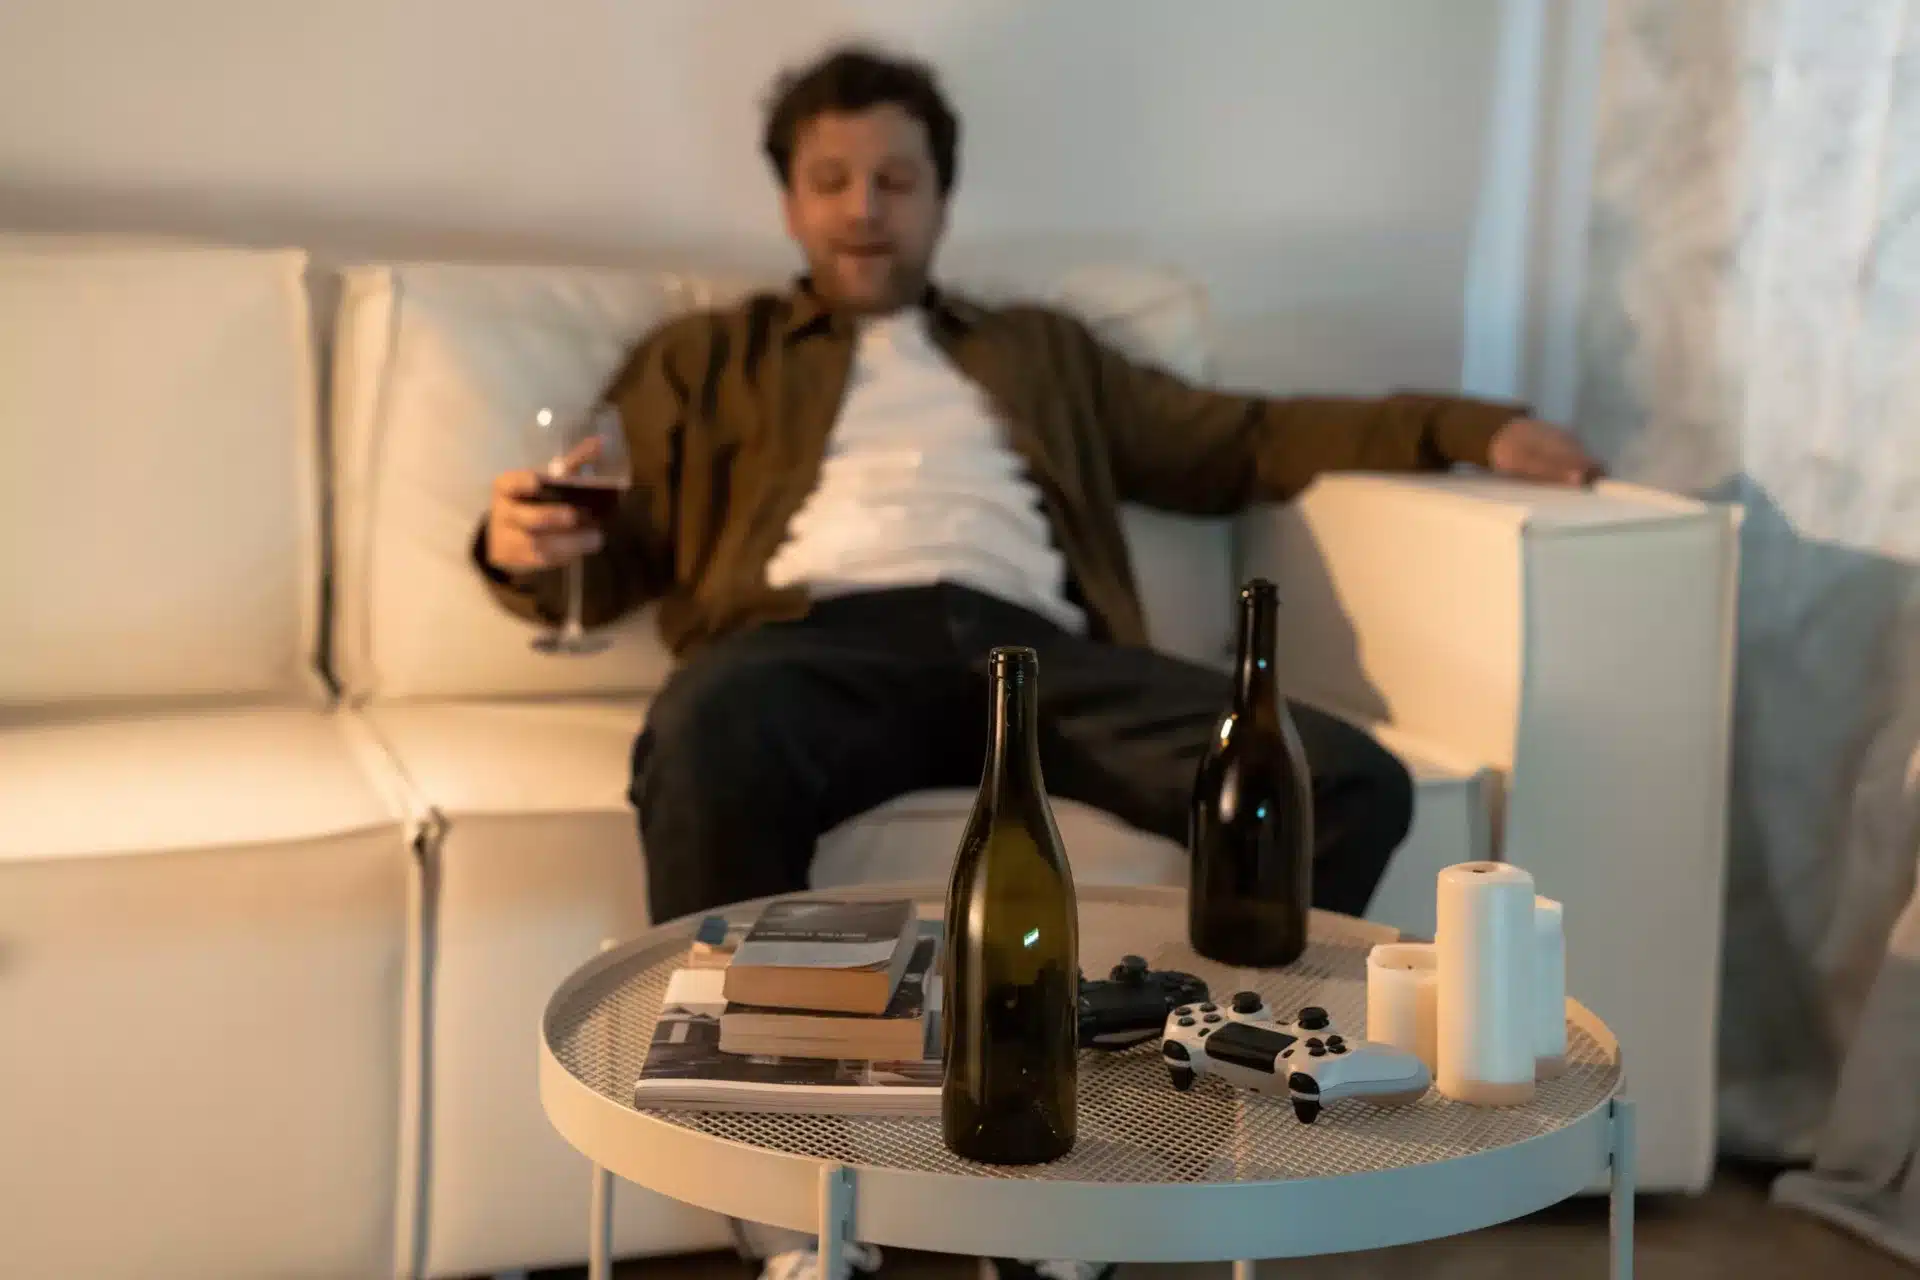 Man Sitting on White Sofa with Glass of Wine Beside Table with Bottles and Candles